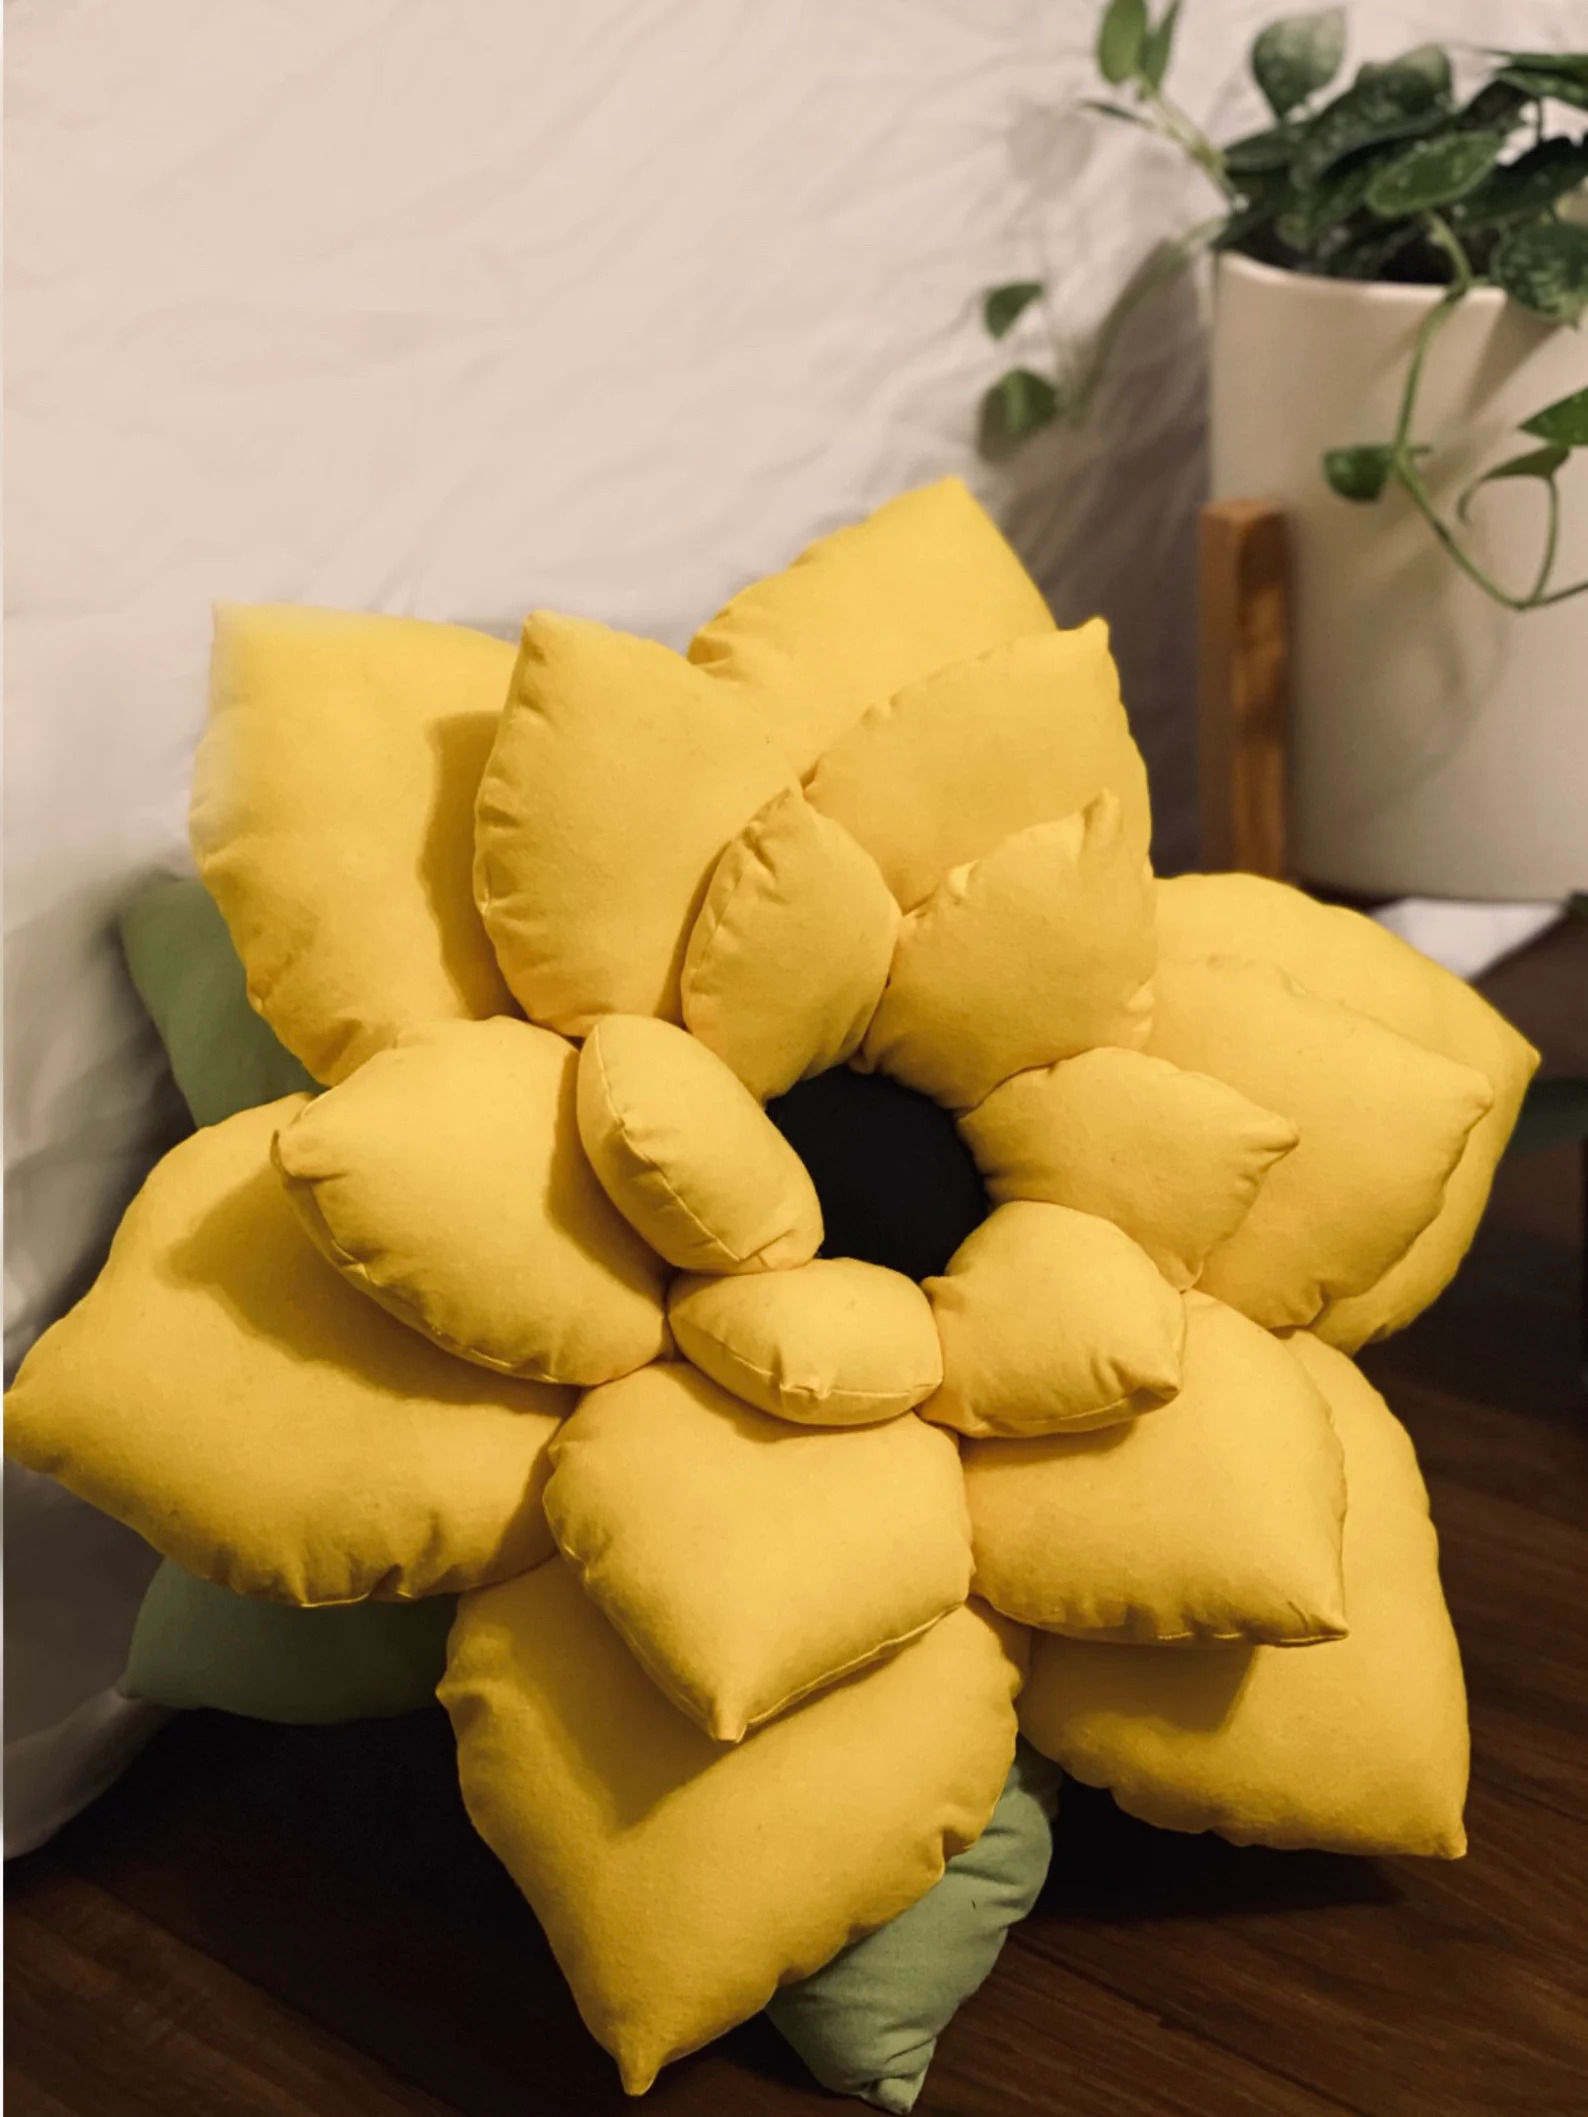 16 Cheerful Sunflower Pillow Designs For The Summer